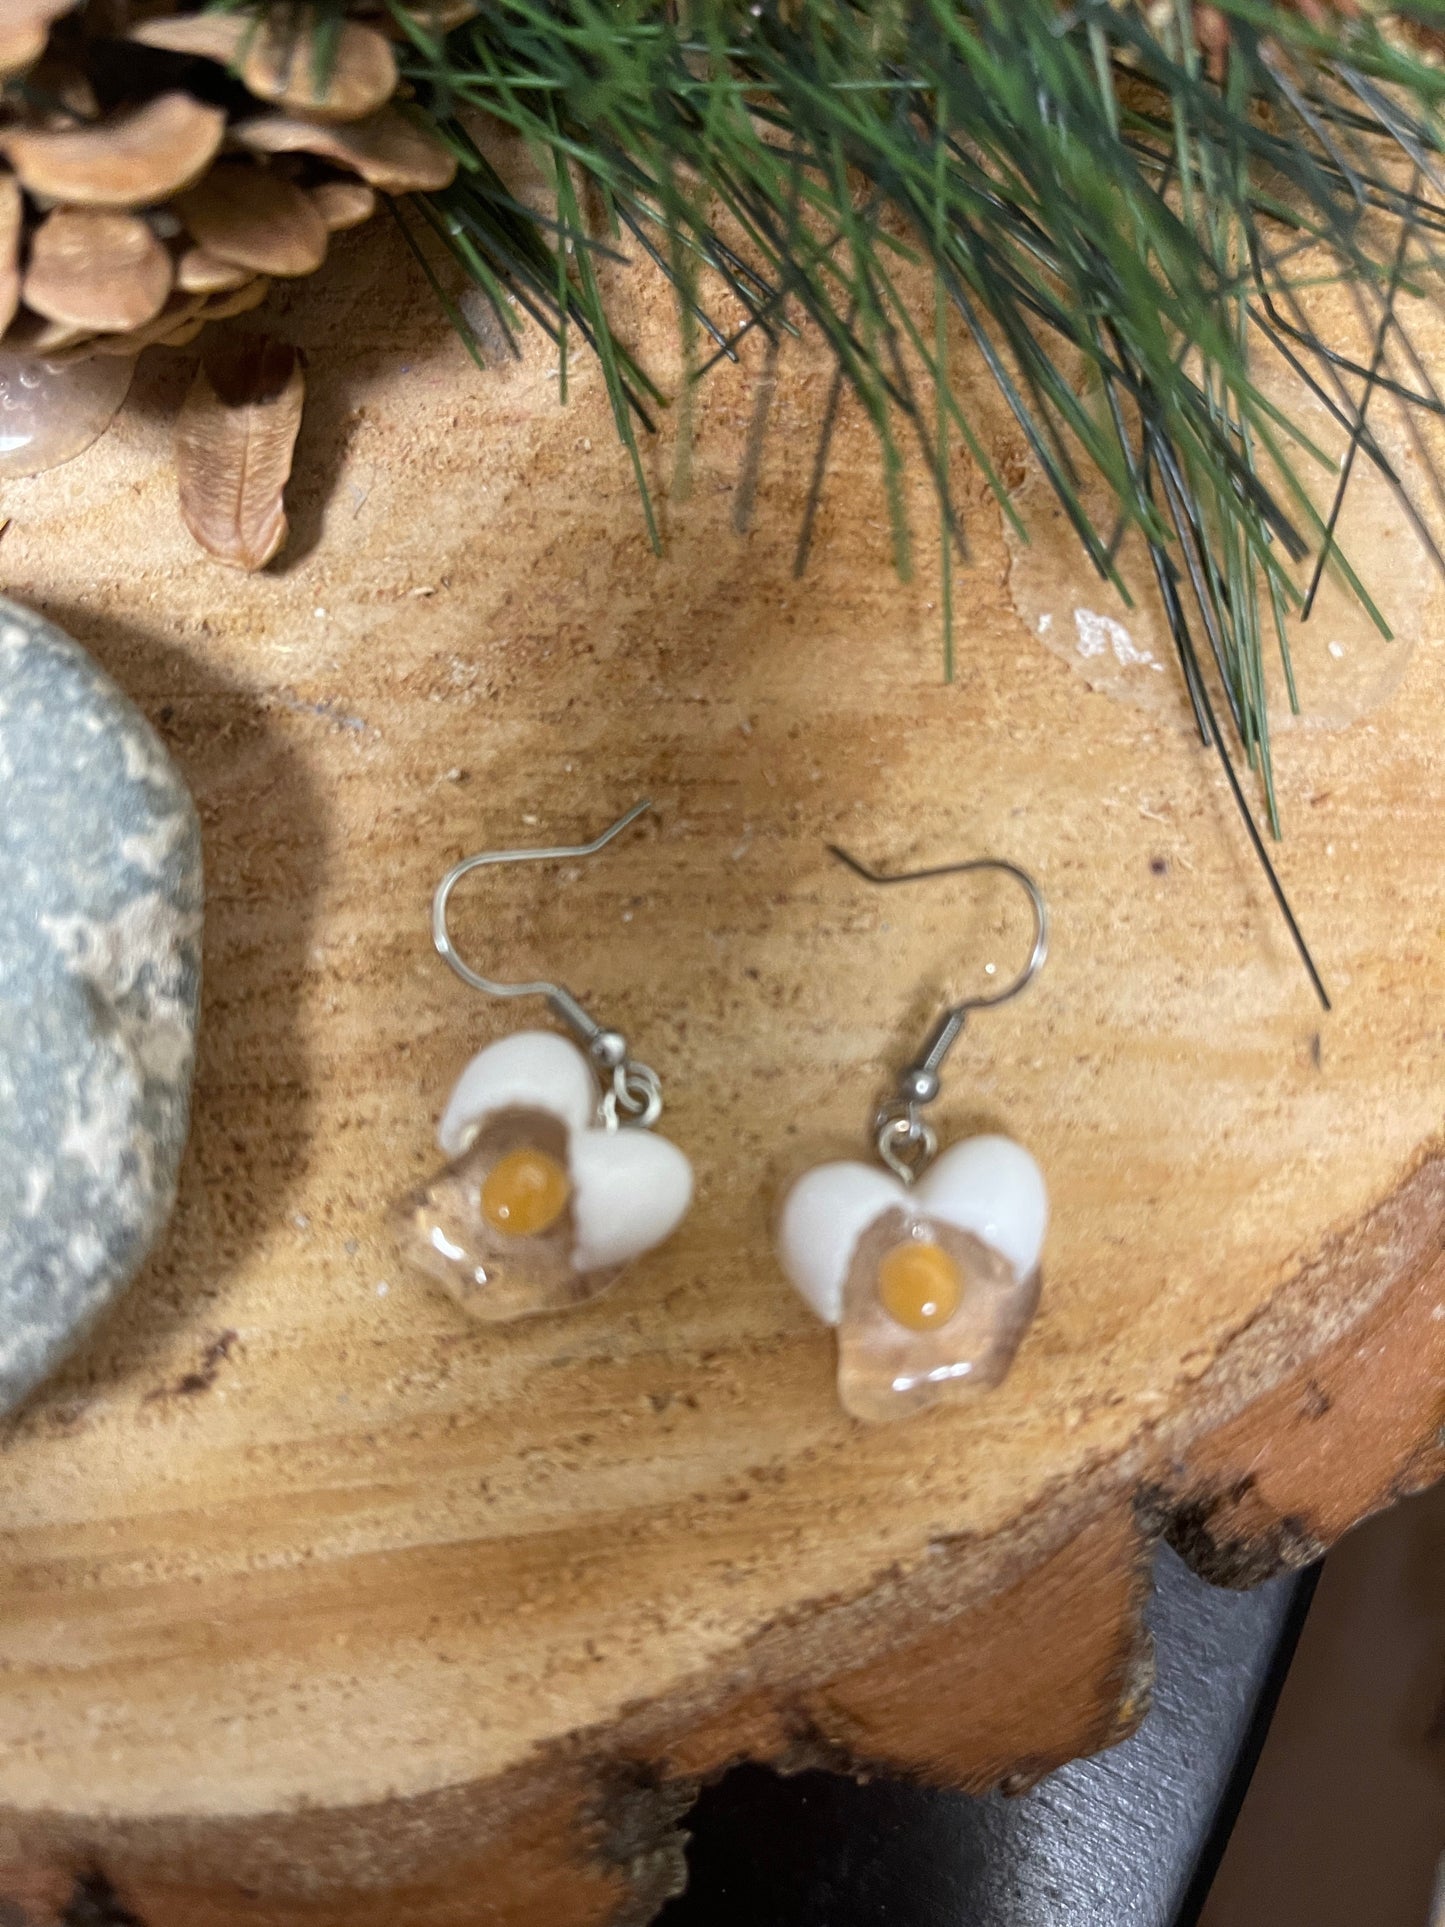 Cracked Egg Charms Wire Earrings